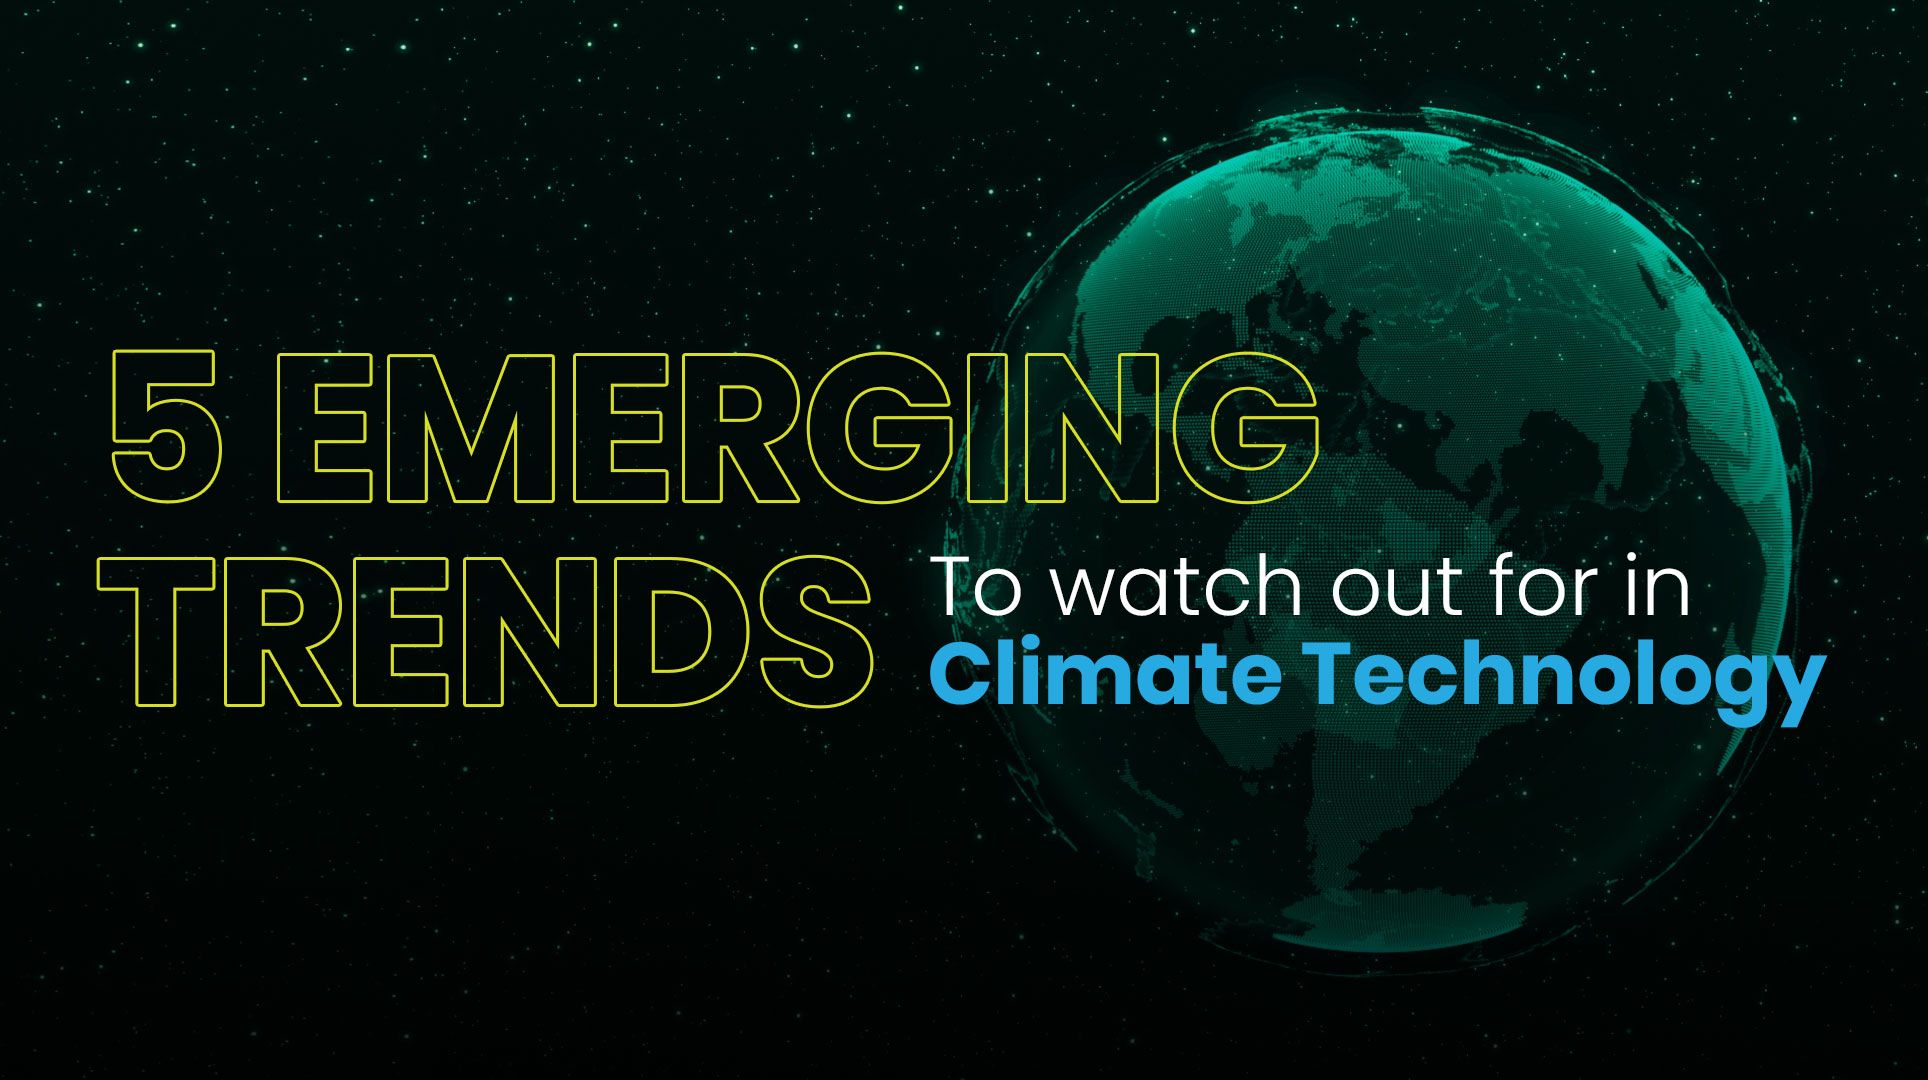 5 Emerging Trends To Watch Out For In Climate Technology!